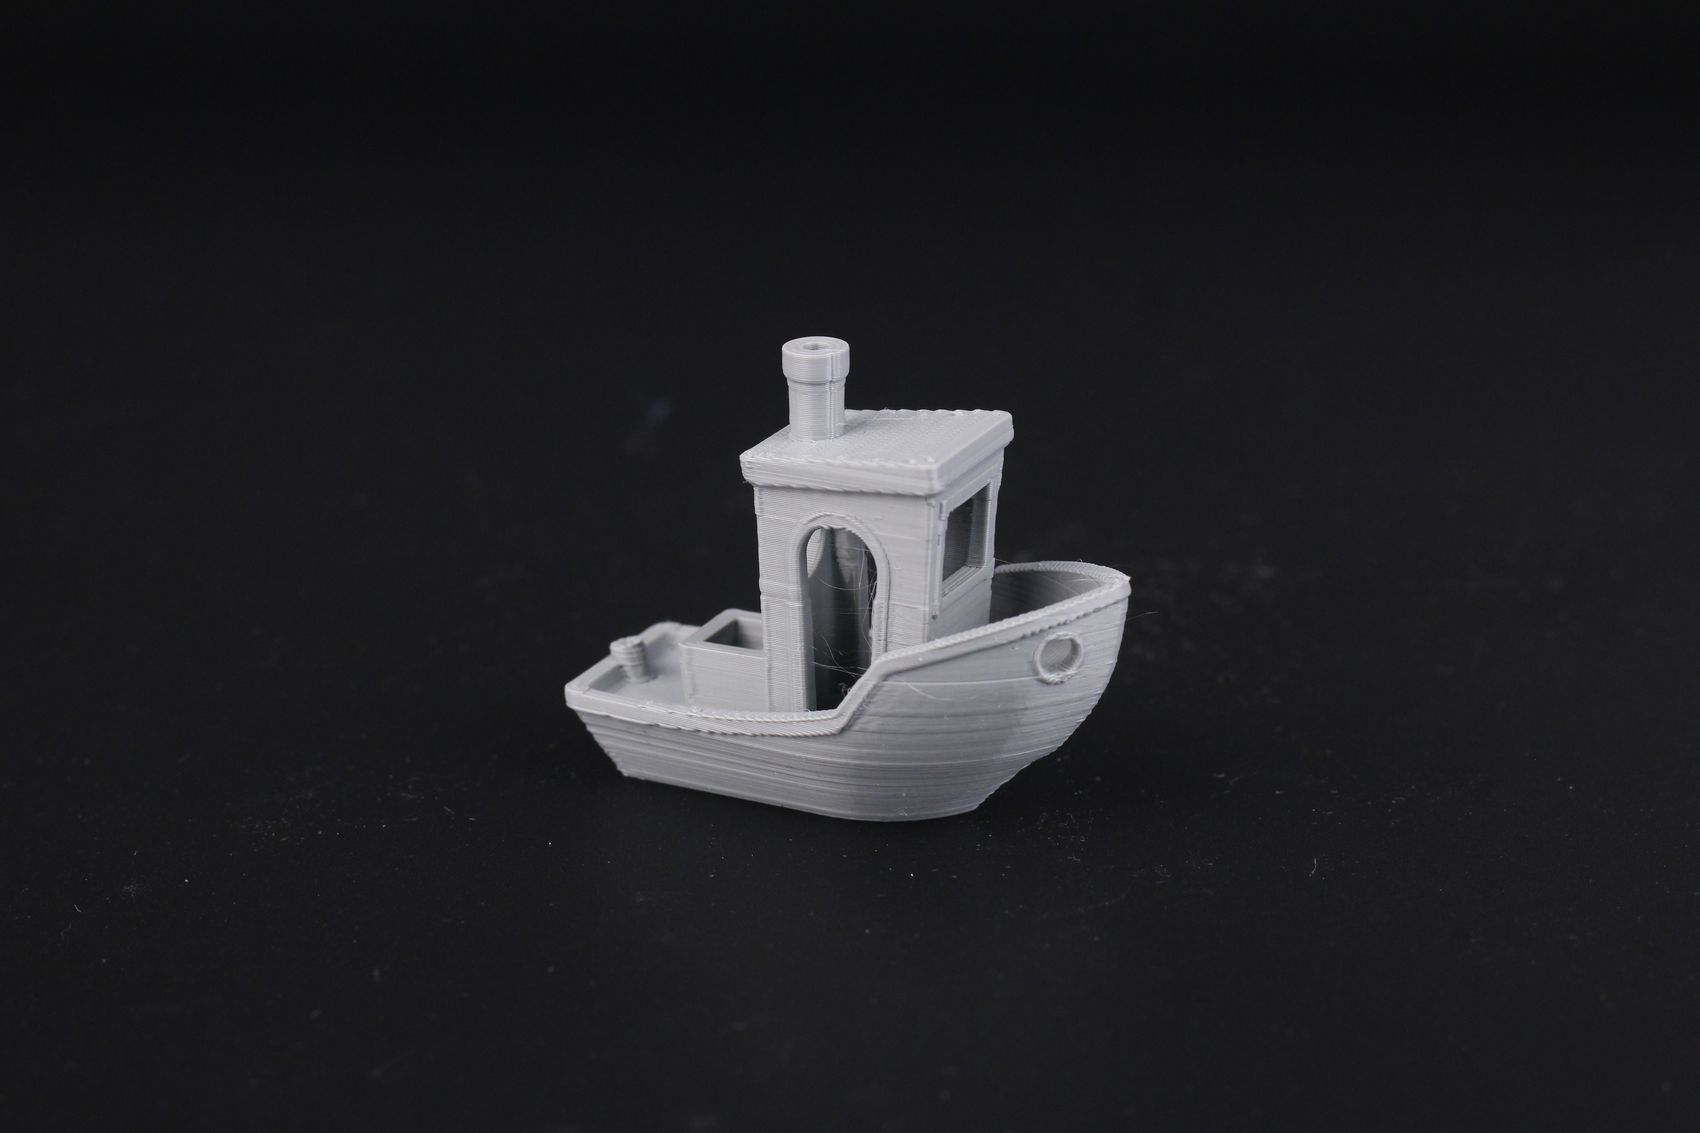 3D Benchy printed on the Anycubic Kobra Plus3 | Anycubic Kobra Plus Review: A Larger Vyper